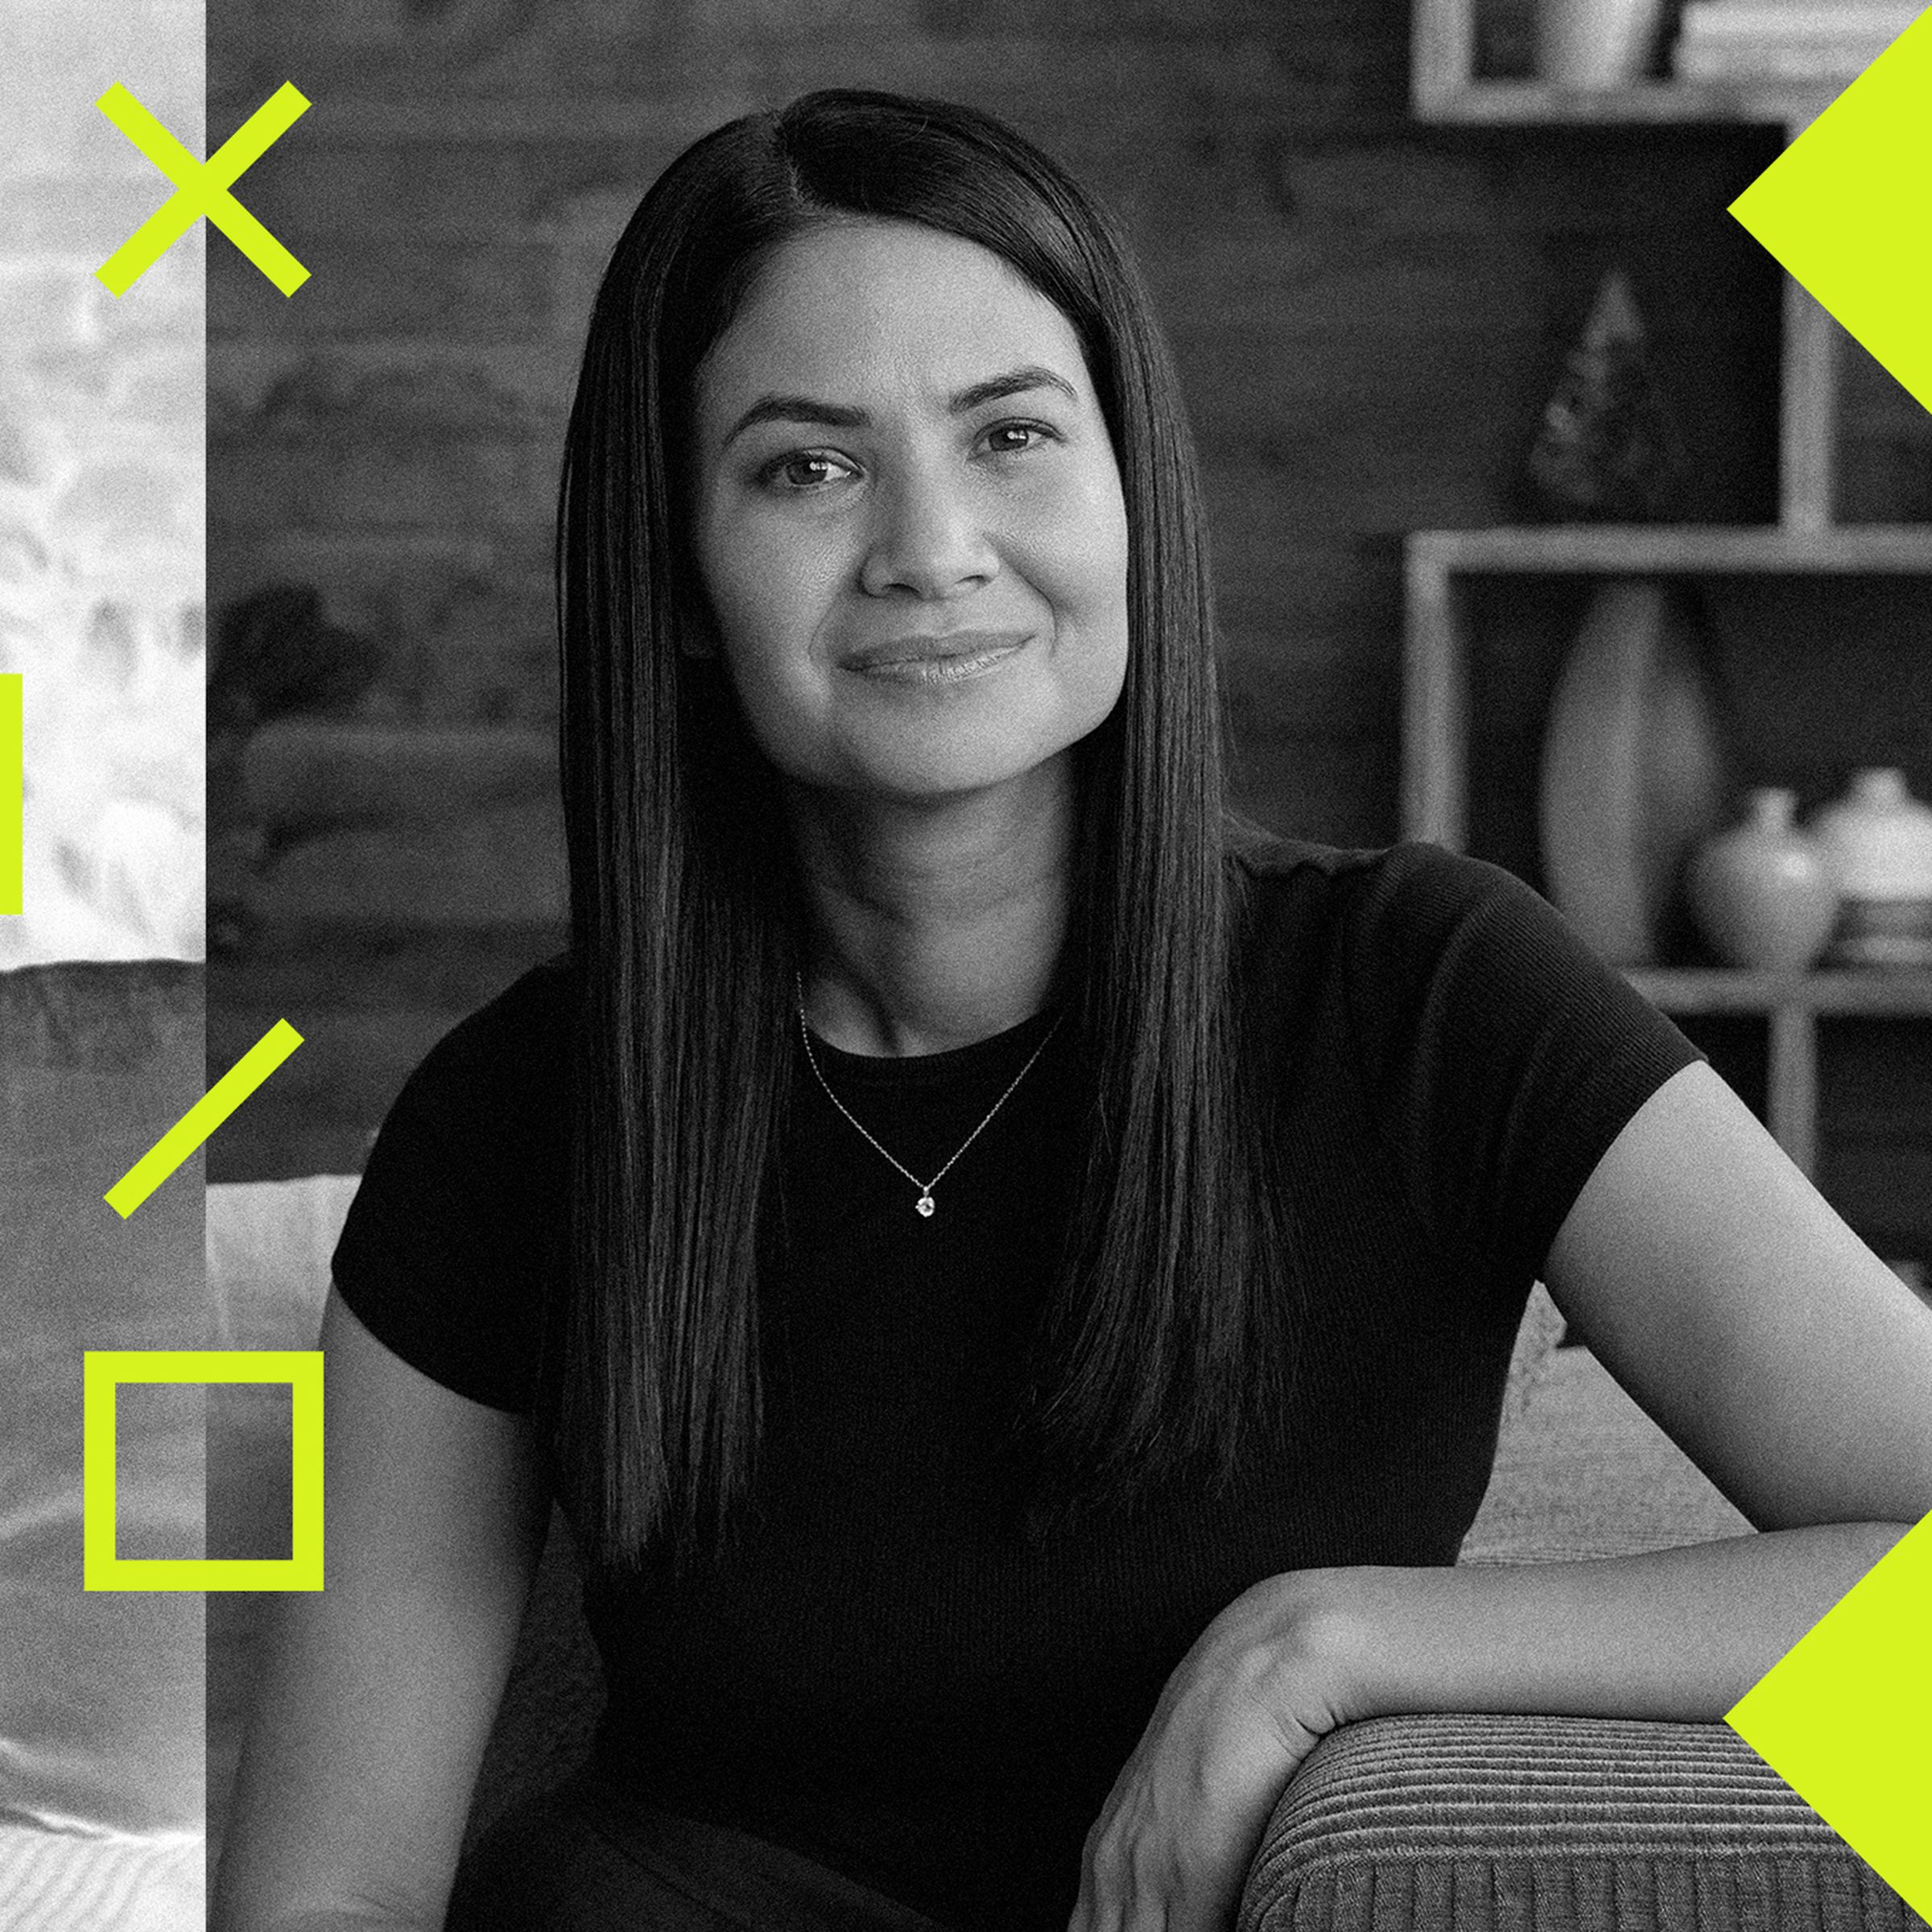 A photo illustration and portrait of Canva CEO and co-founder Melanie Perkins. 